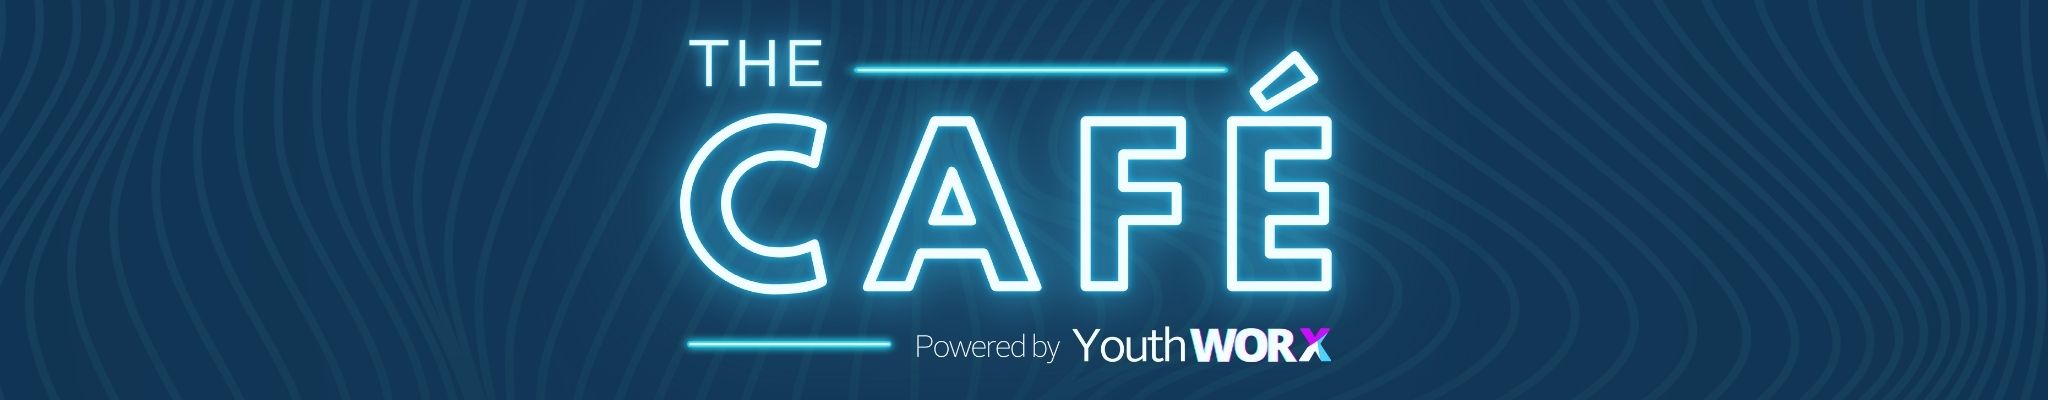 The Café, Powered by Youth Worx